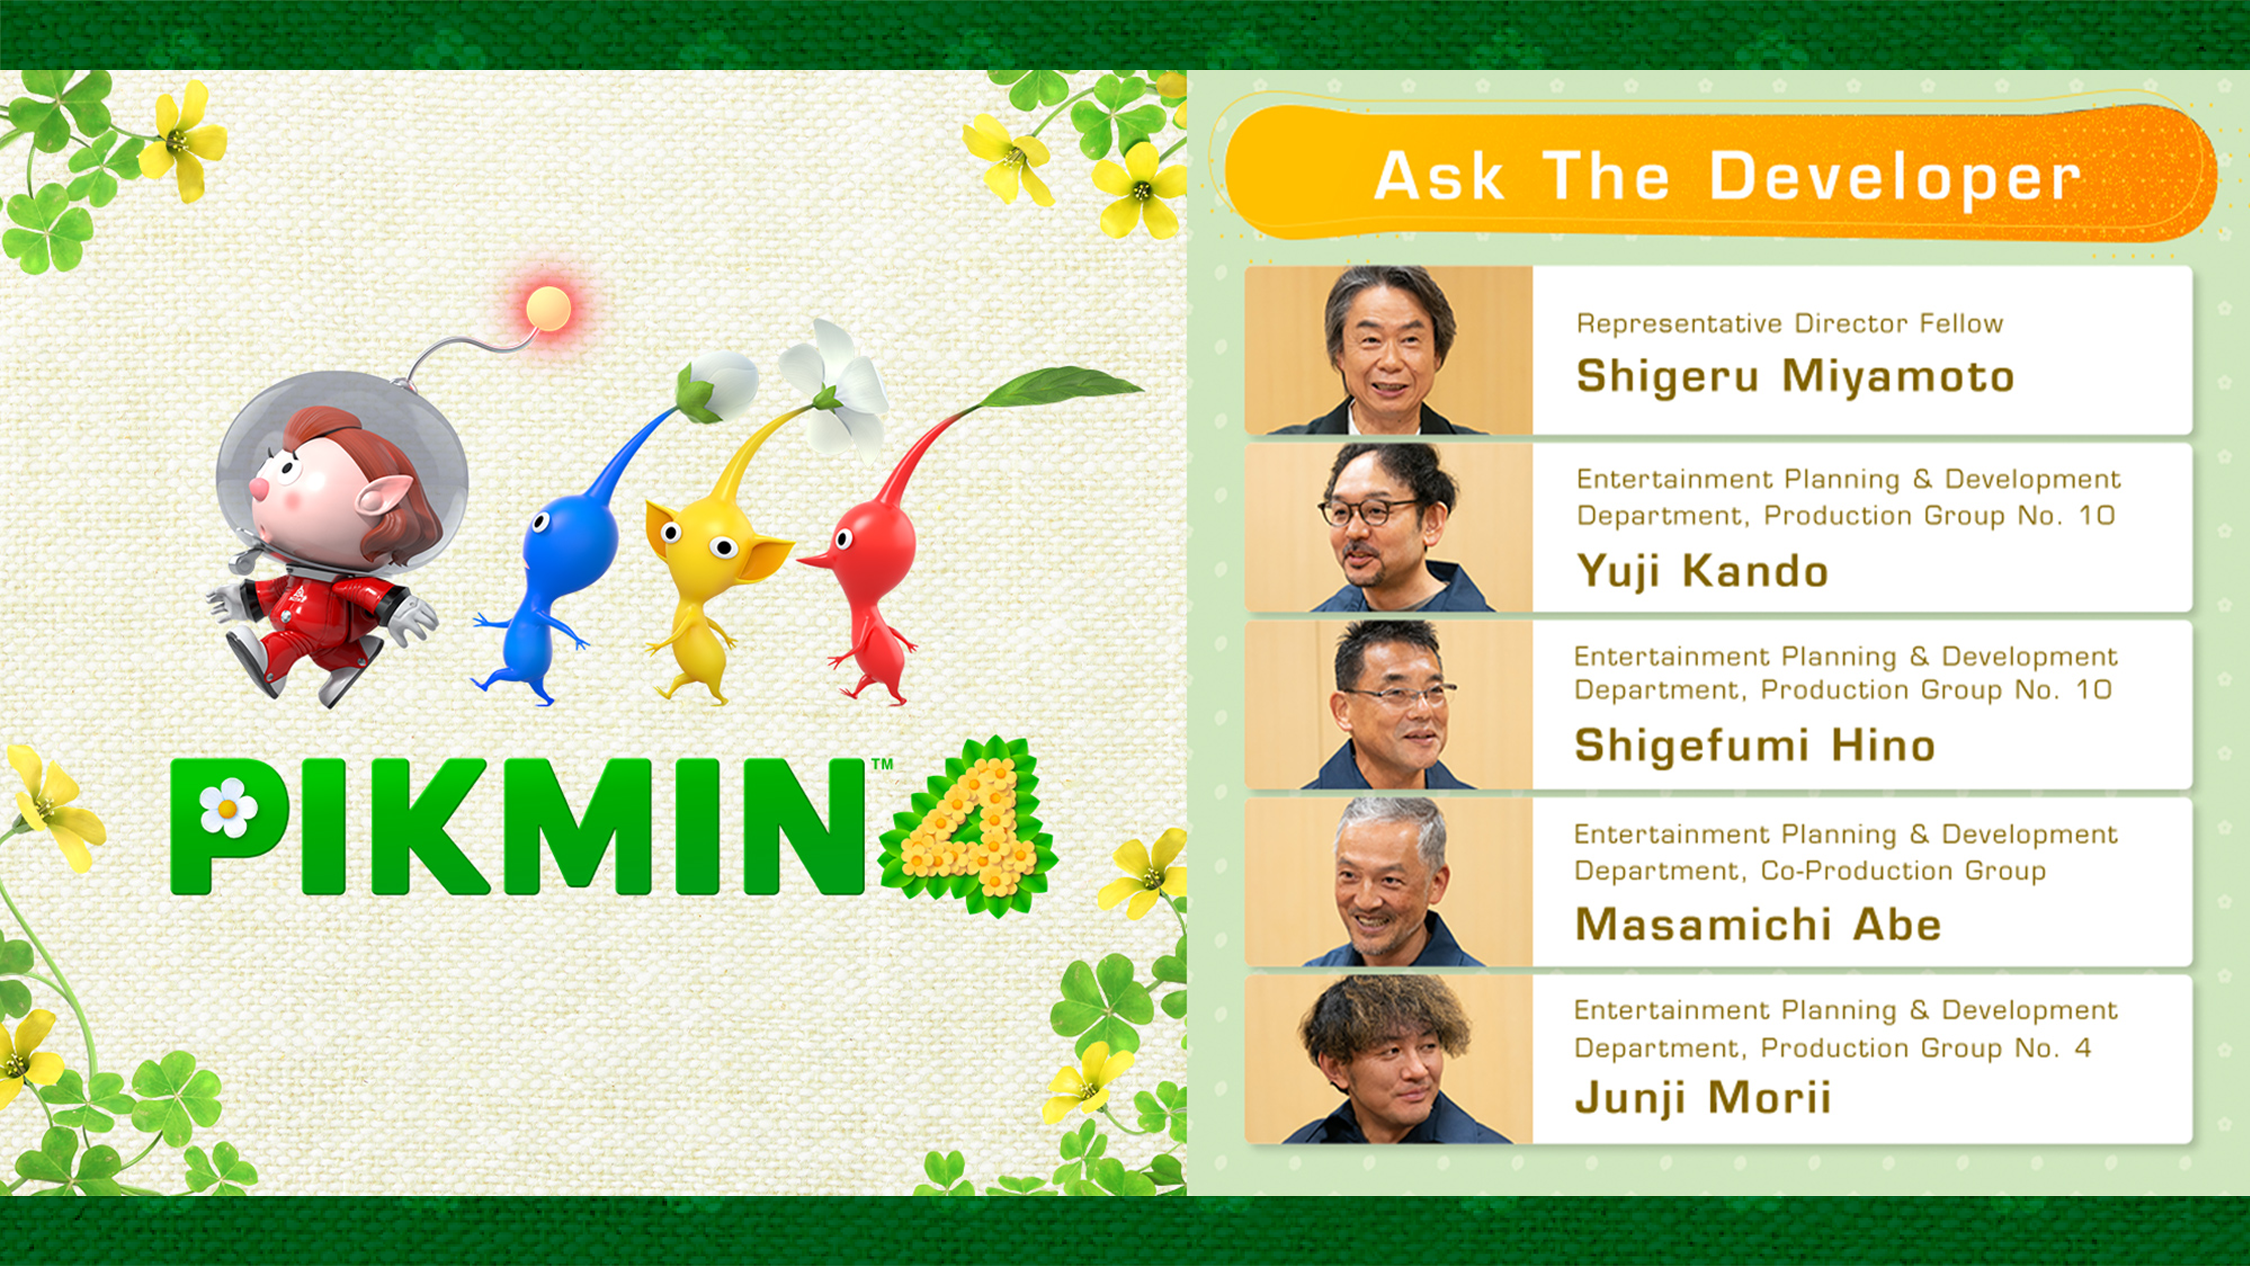 2250x1266_WN_ATD-Pikmin4-Chapter-1